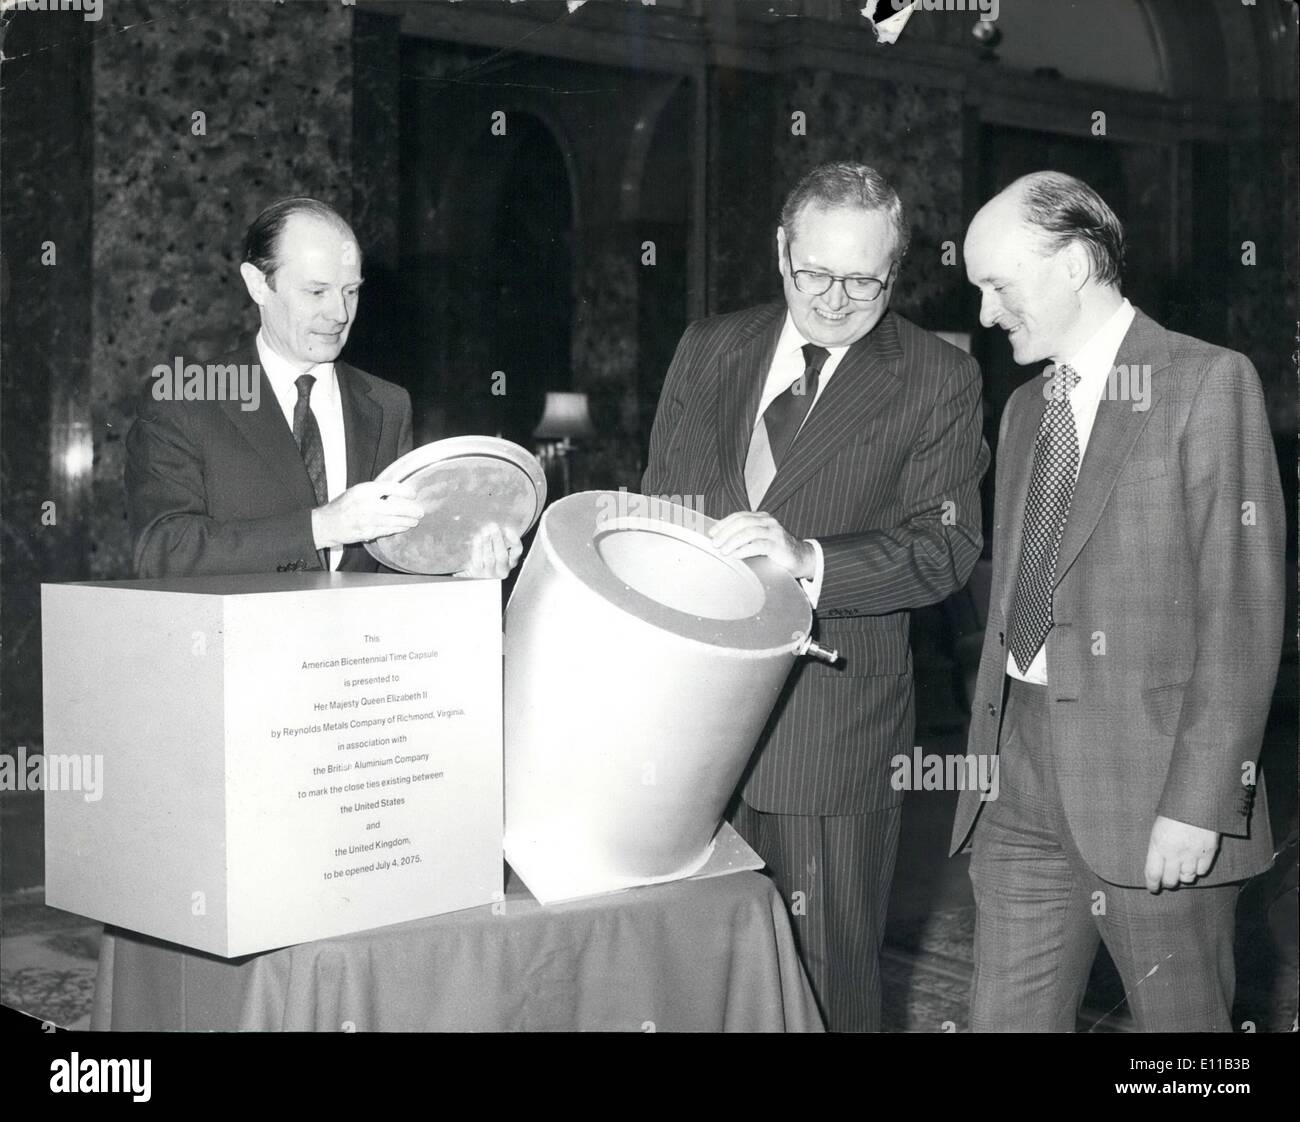 Oct. 10, 1976 - Bicentennial capsule from America for the queen. Mr. George Walters, president of Reynolds Metalss Co, of Richmond, Virginia, USA, center, with Mr. Brian Kelet, left, chairman of the British aluminum company, and Mr. Ronny utiger, Managing director of BA, inspect an aluminum time capsule which was received today at Buckingham palace by Sir Matin Chartris, private secretary to the Queen, on behalf of her Majesty, the Capsule holds documents and other Items connected with the recent Royal visit to the united states for the American bicentennial celebrations Stock Photo